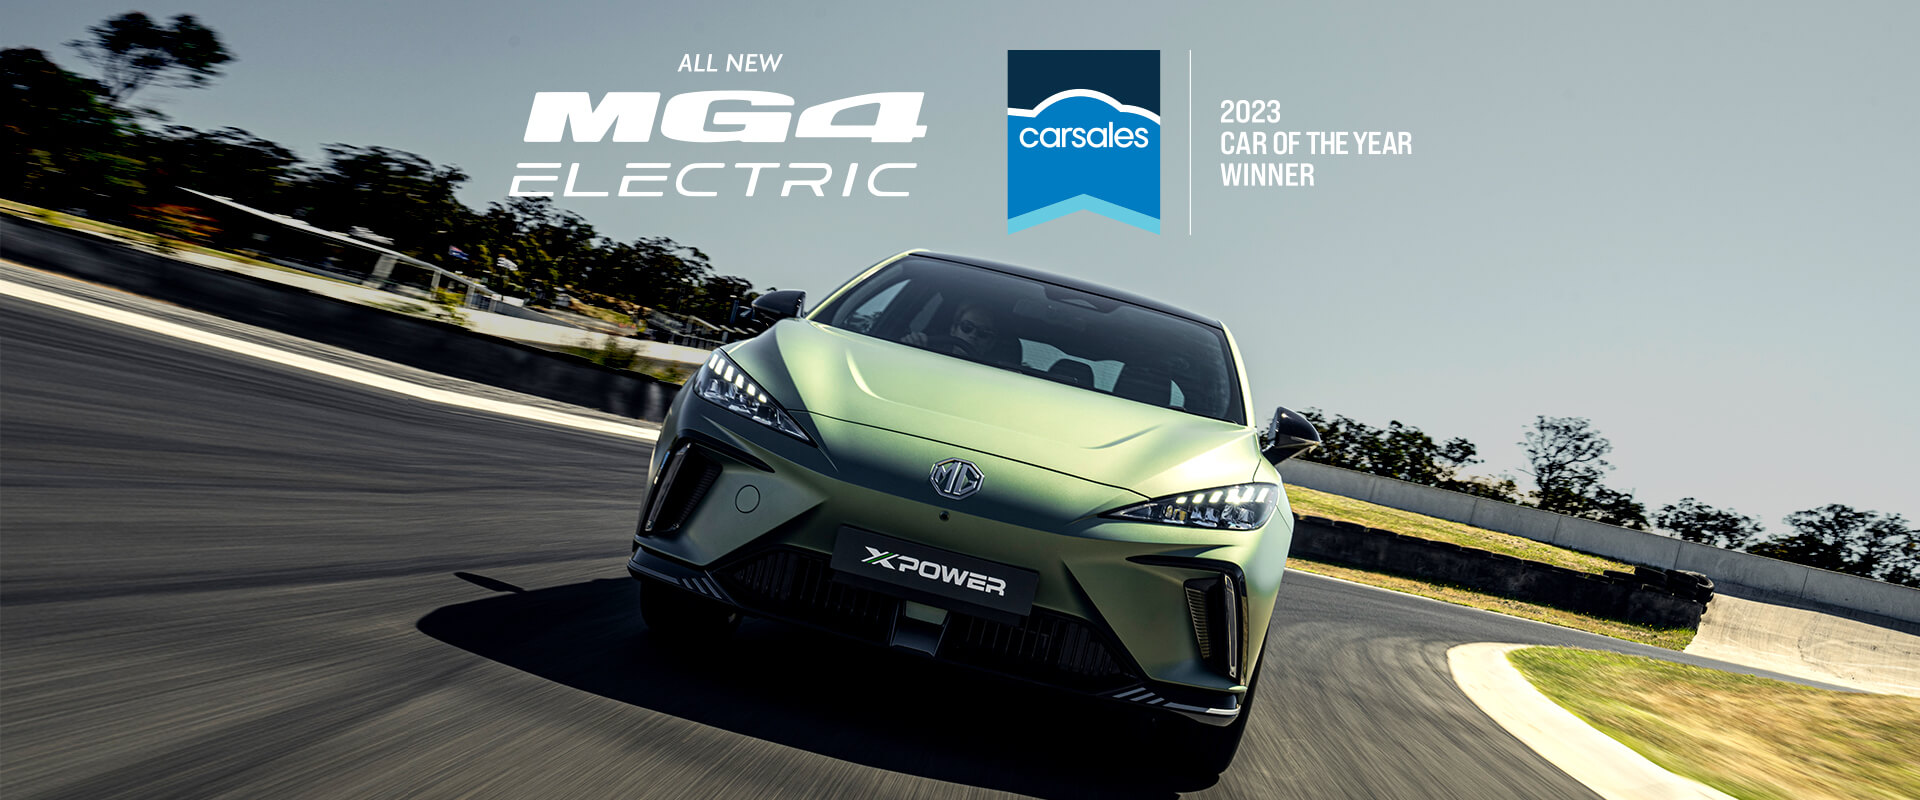 MG4 ELECTRIC XPOWER | Carsales - 2023 Car of the Year Winner